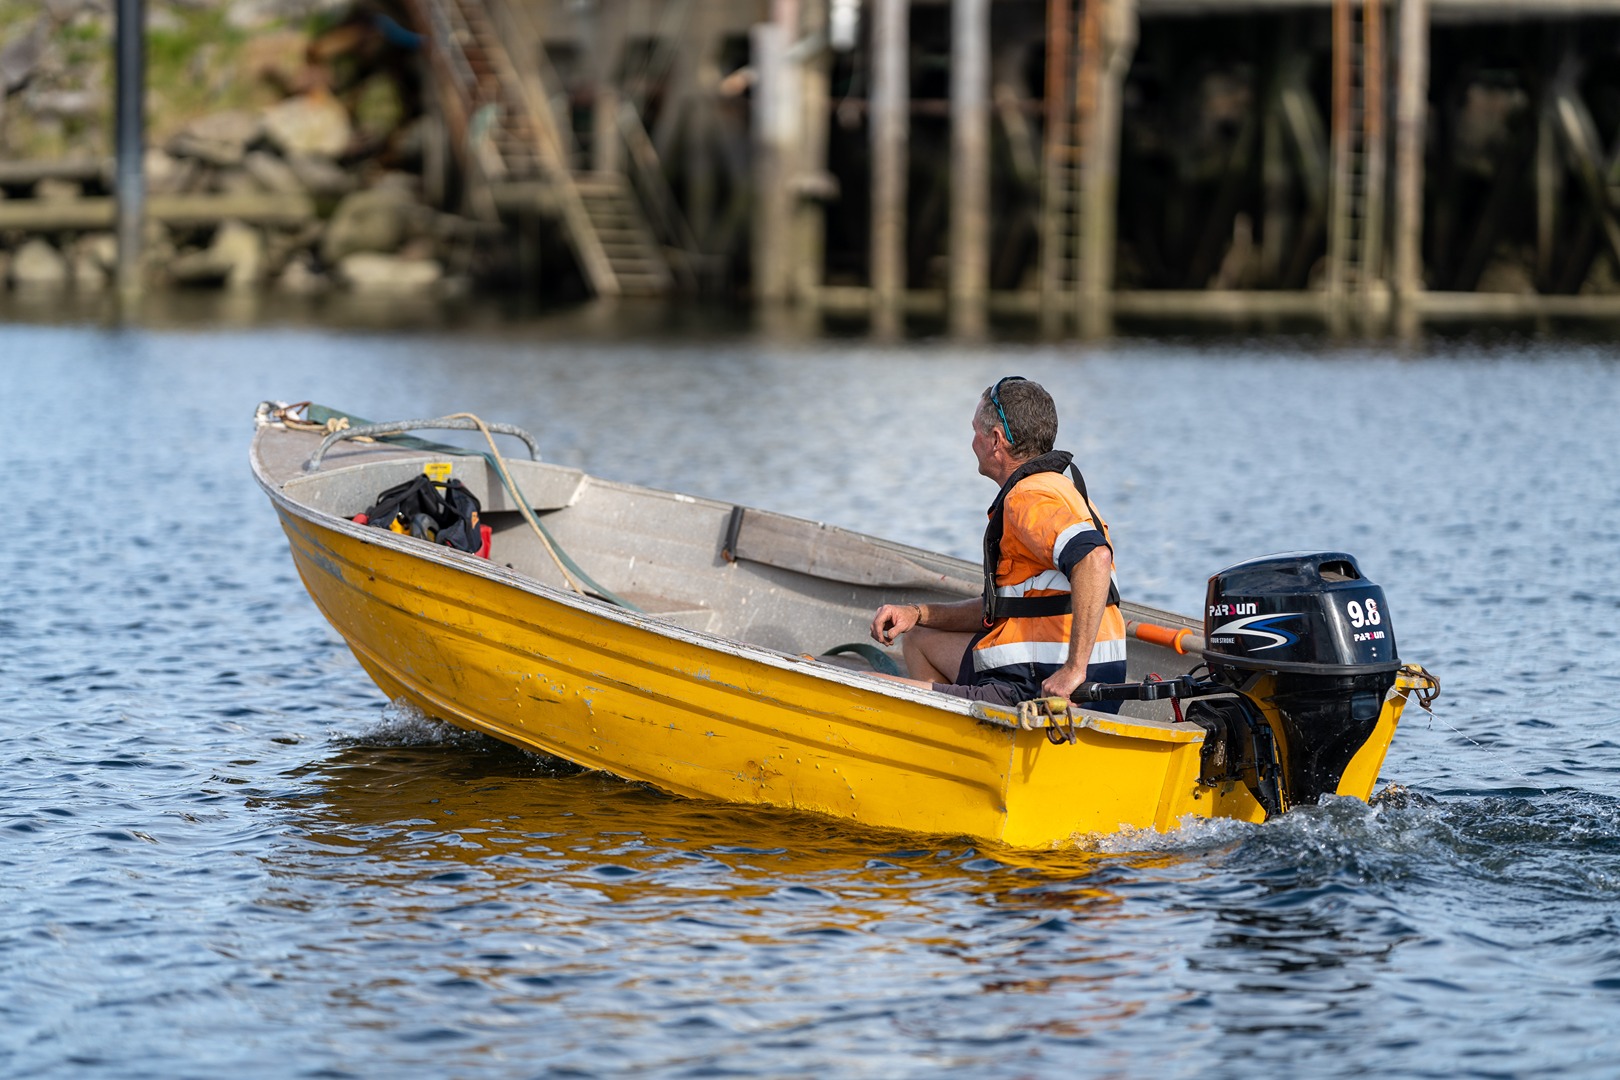 Man driving away on yellow boat